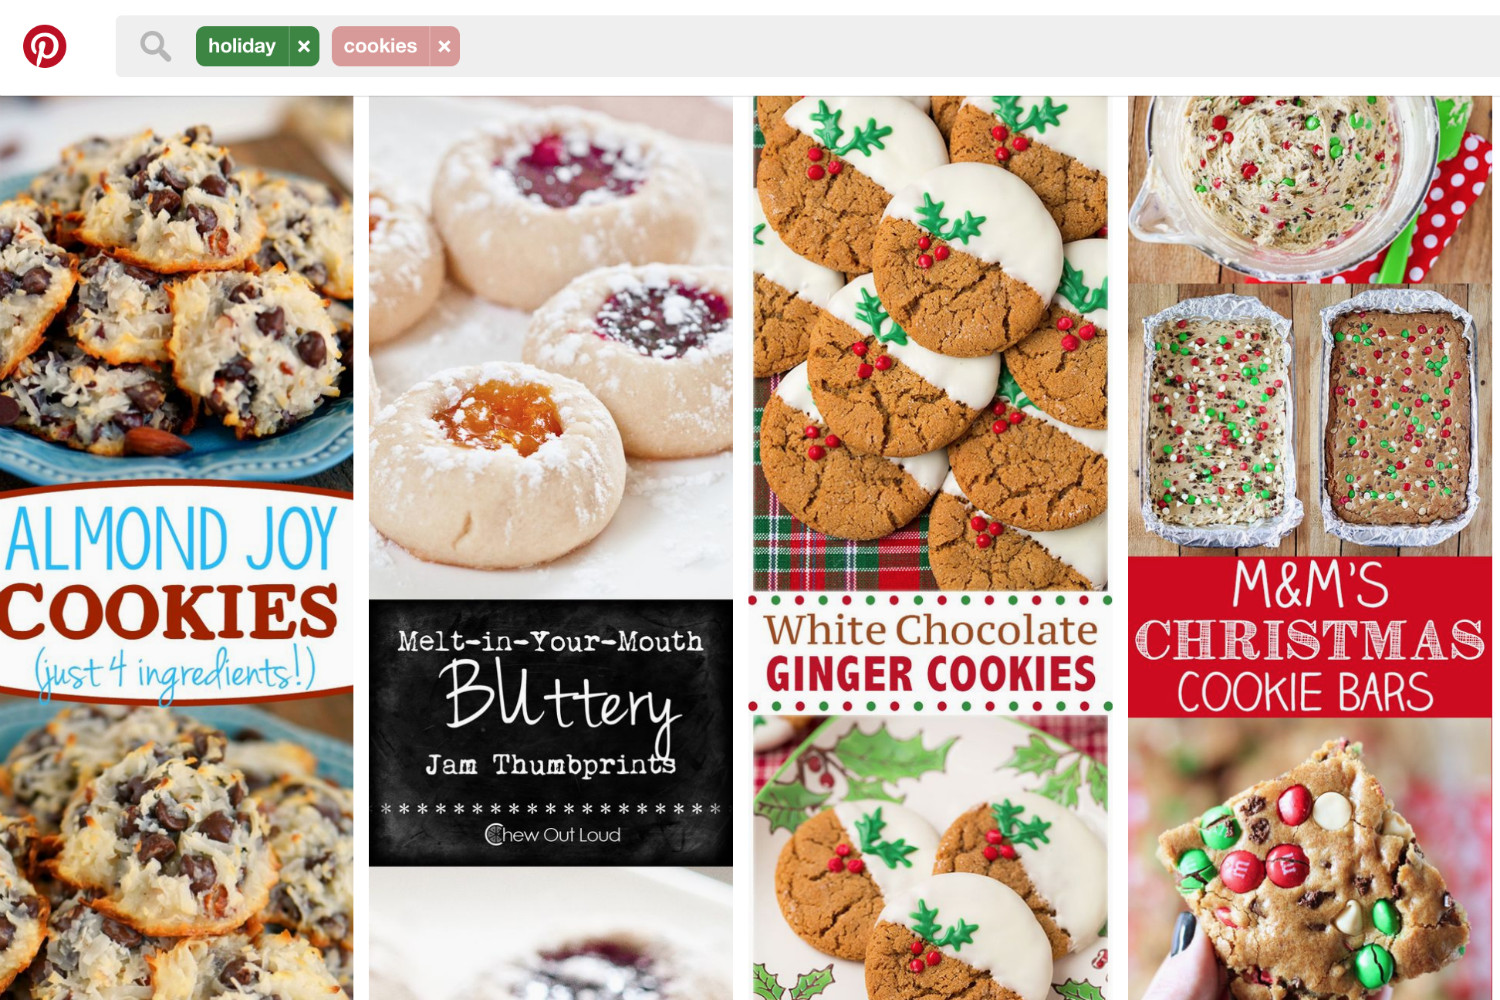 Popular Christmas Cookies
 What is Pinterest’s most popular Christmas cookie recipe